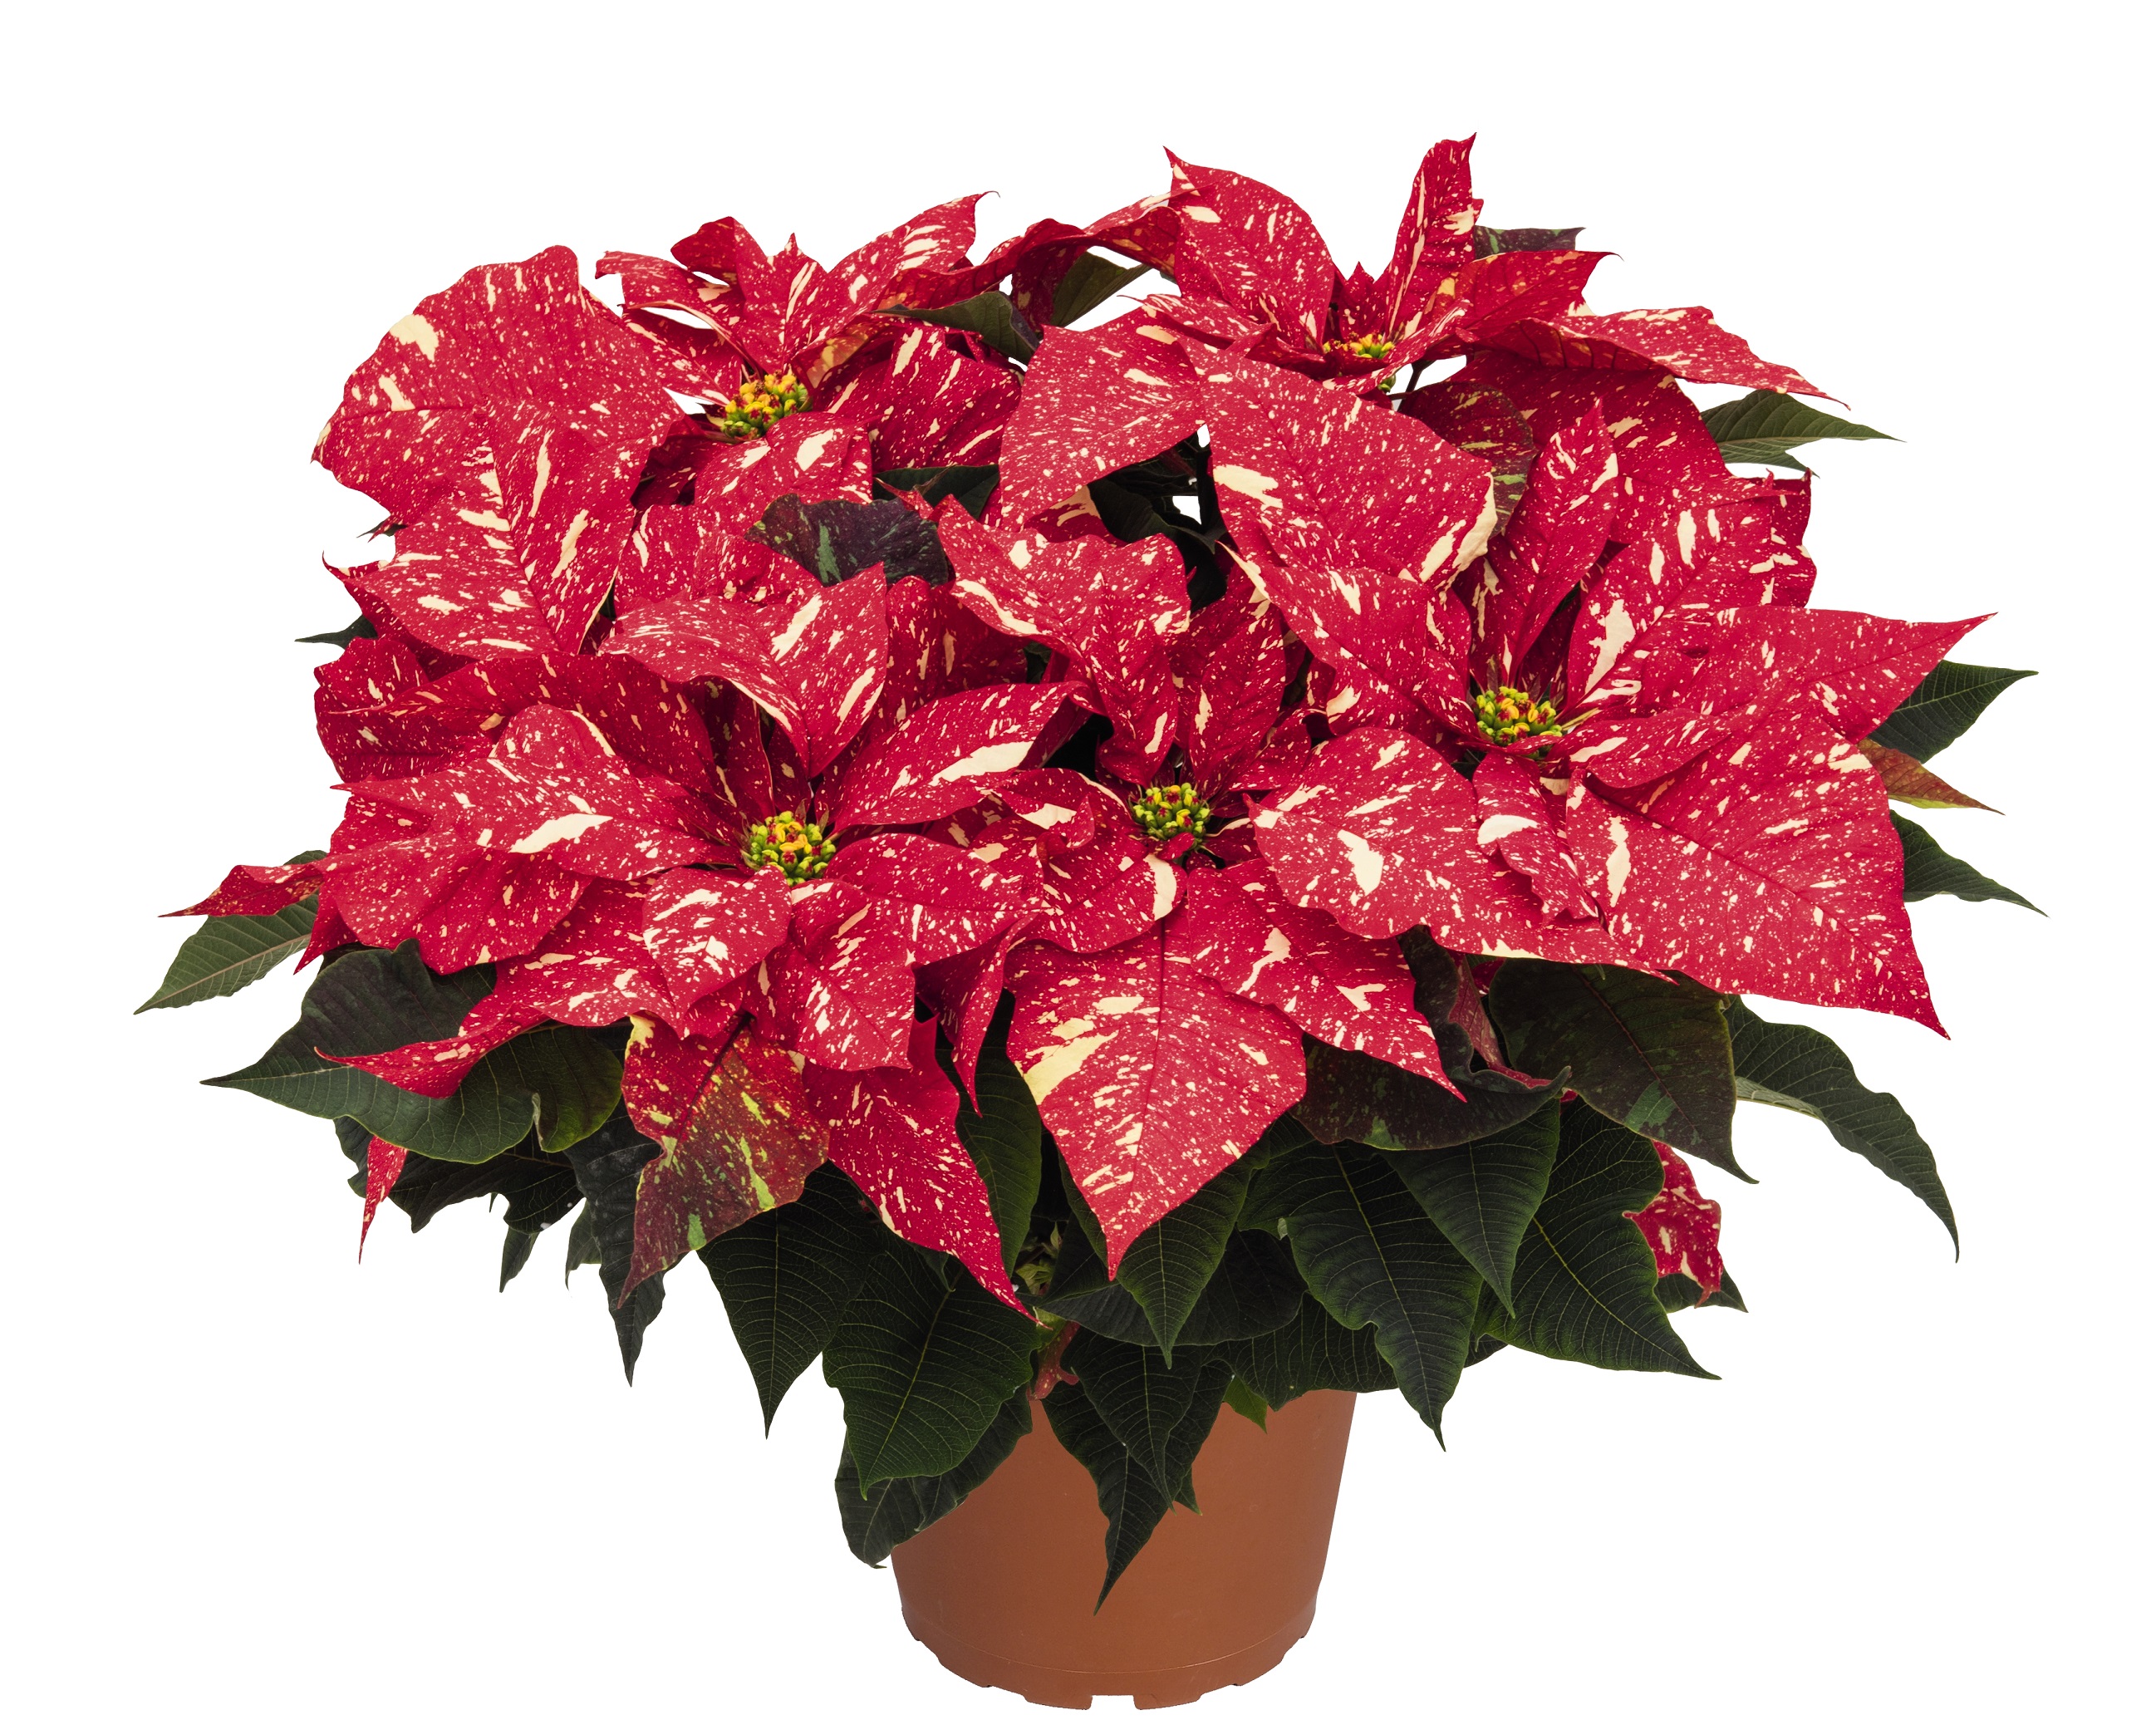 7 not-so-traditional poinsettias to check out this holiday